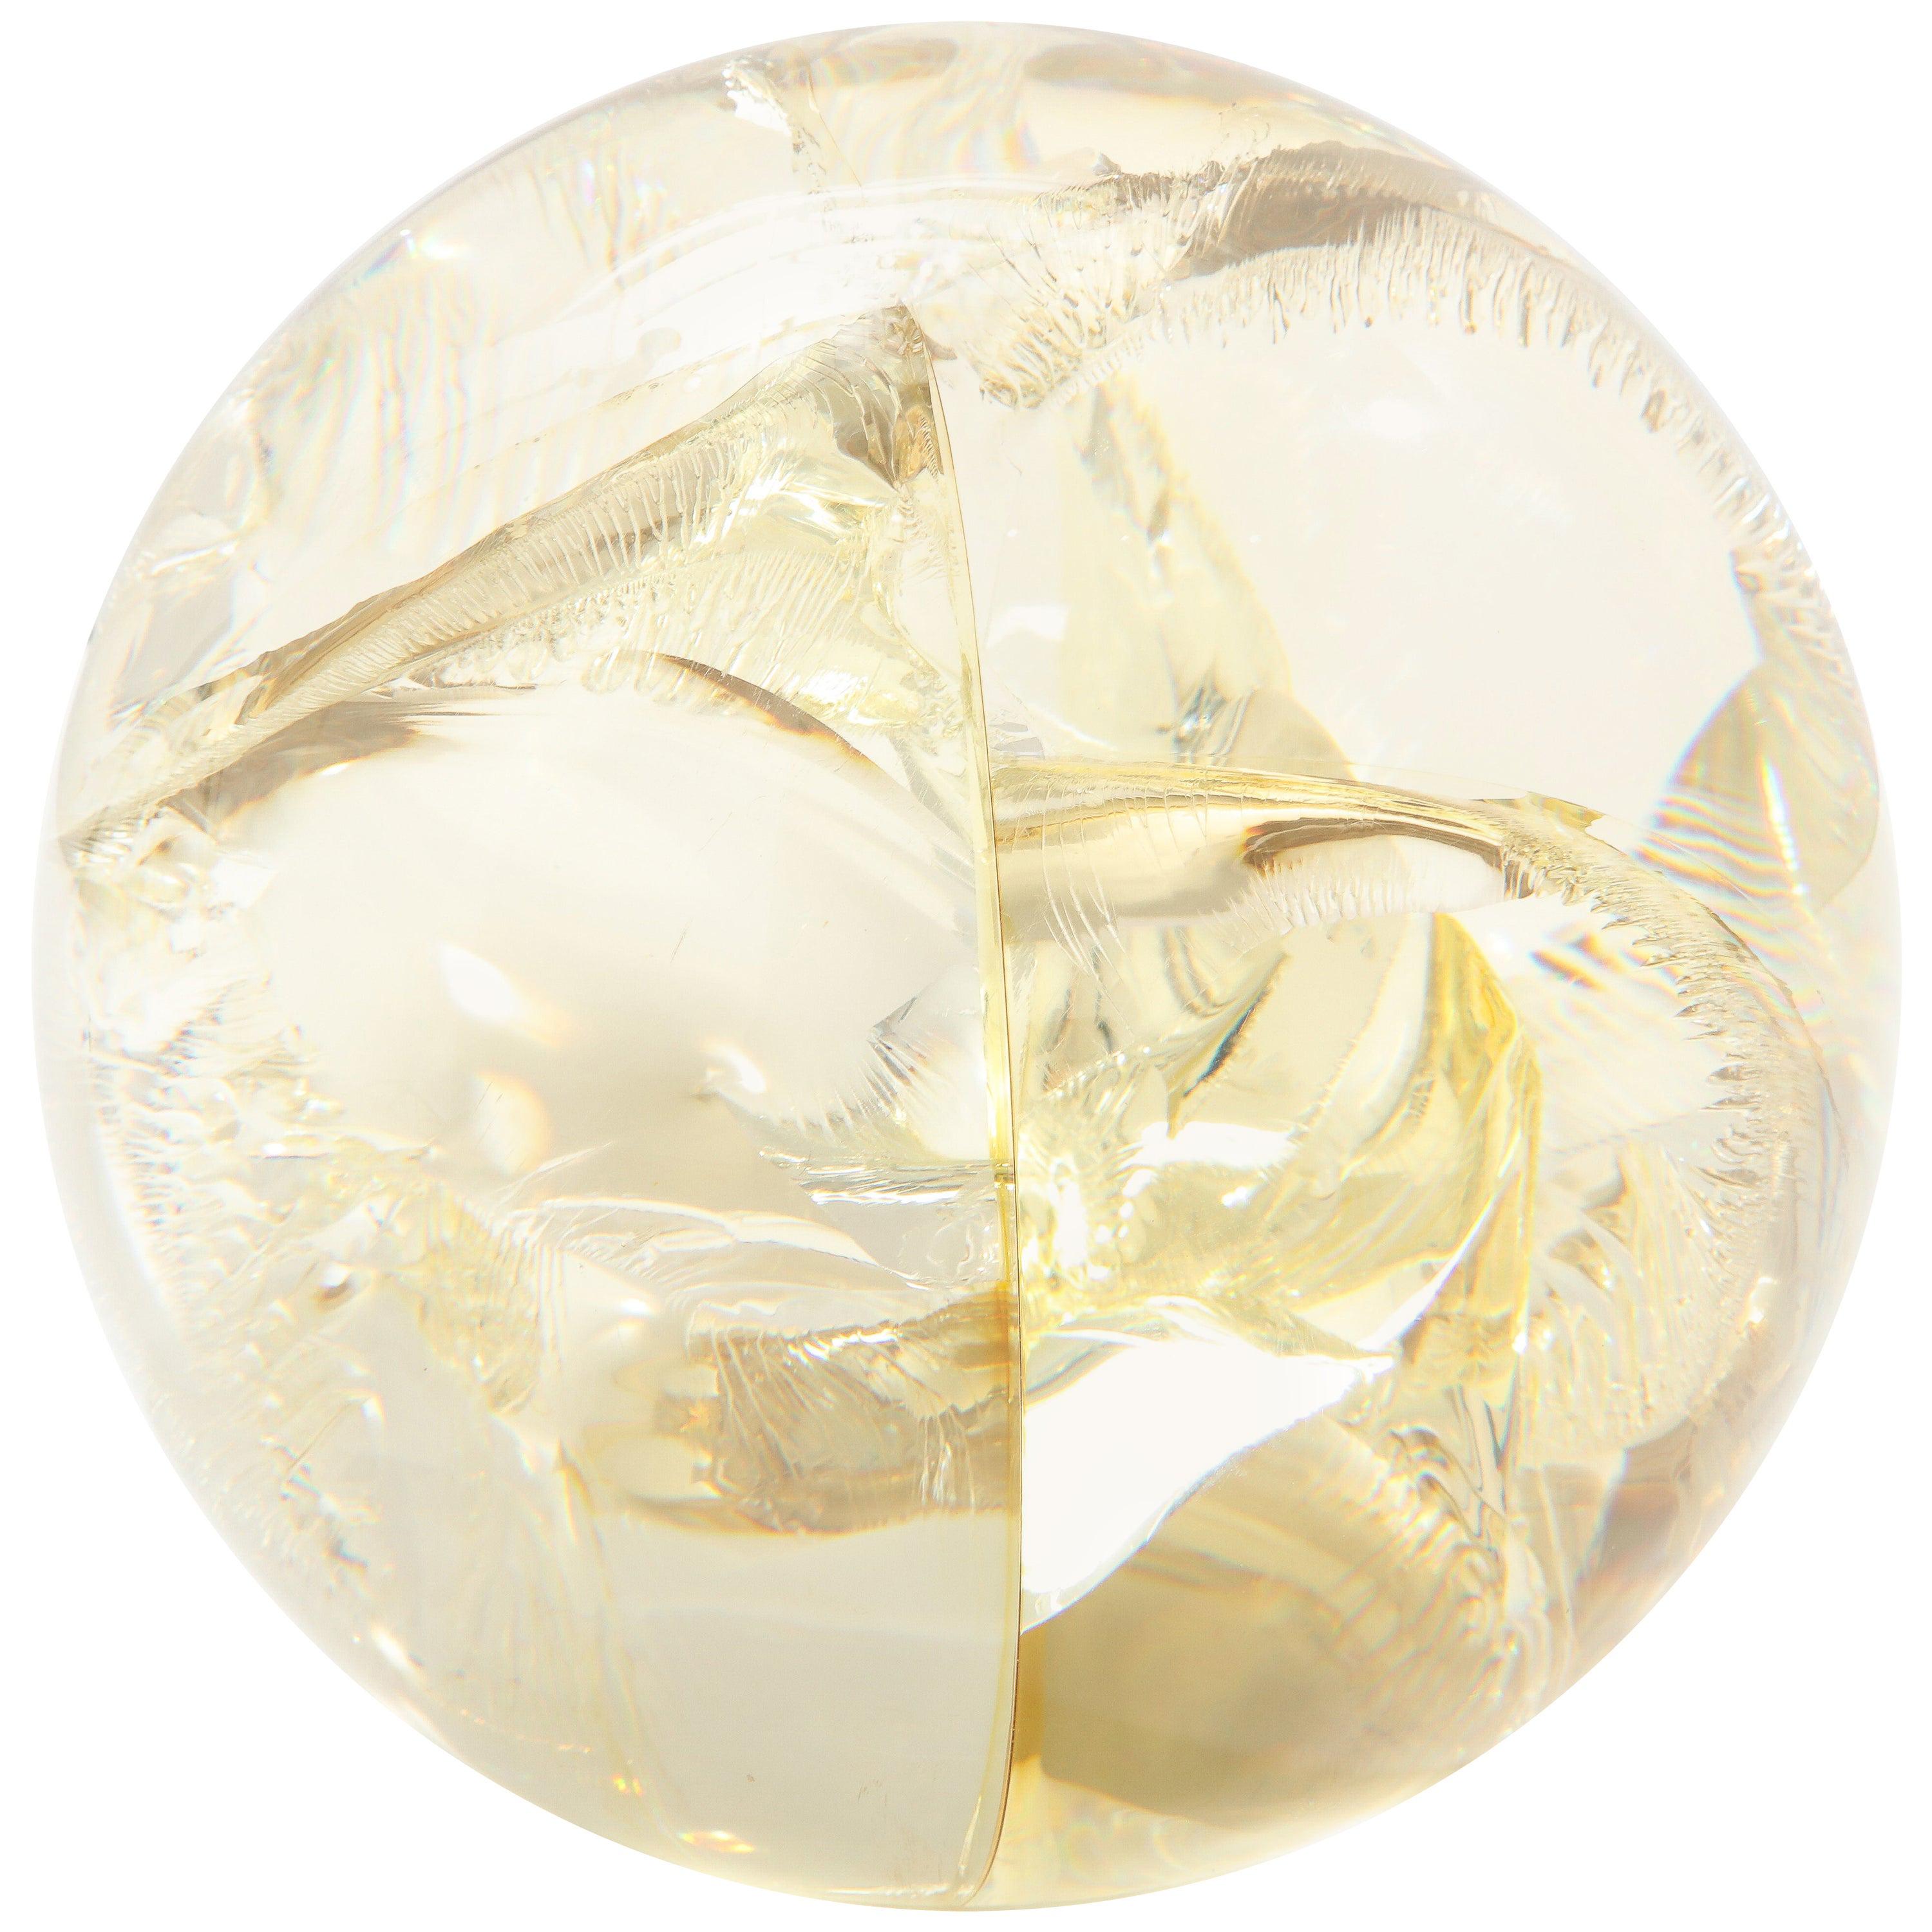 Fractured Resin Sphere, Acrylic Sculpture, Clear & Yellow Gold For Sale